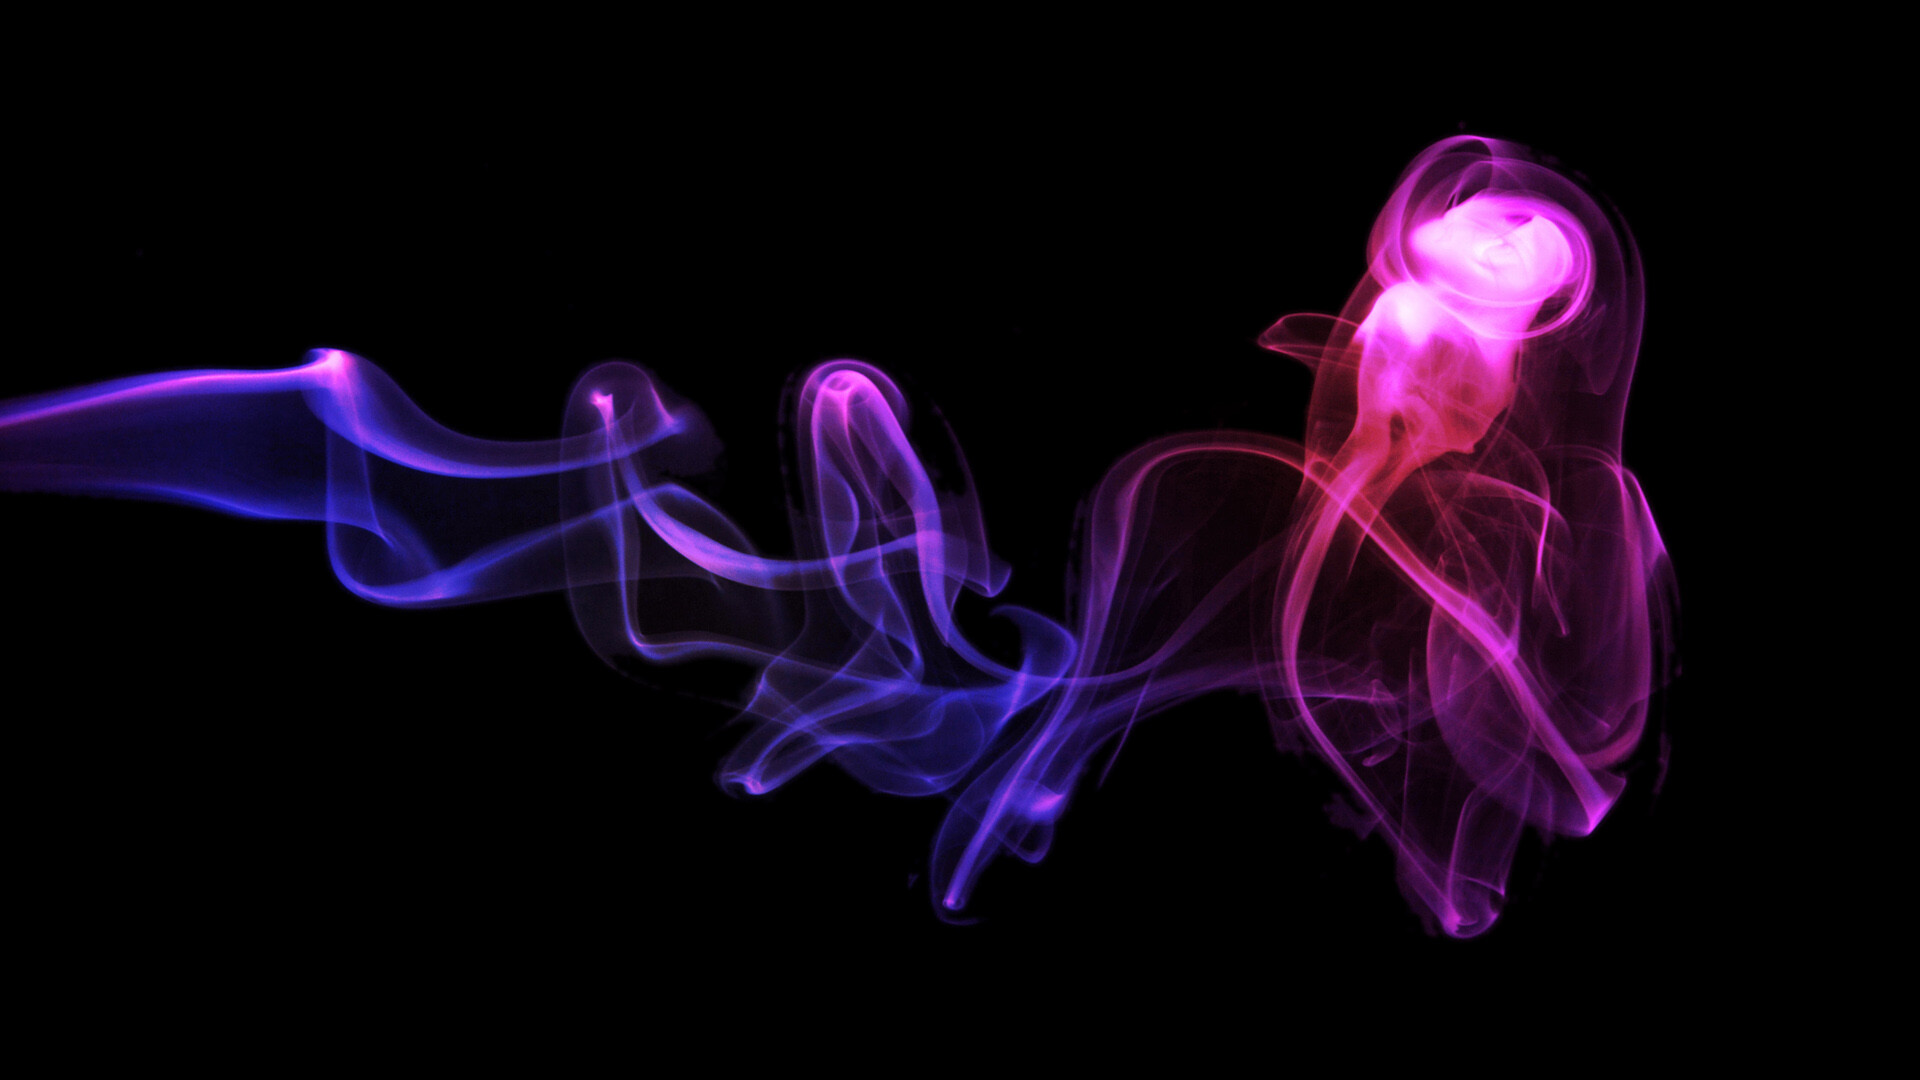 Neon: Used to create interesting visual effects, Abstract. 1920x1080 Full HD Wallpaper.